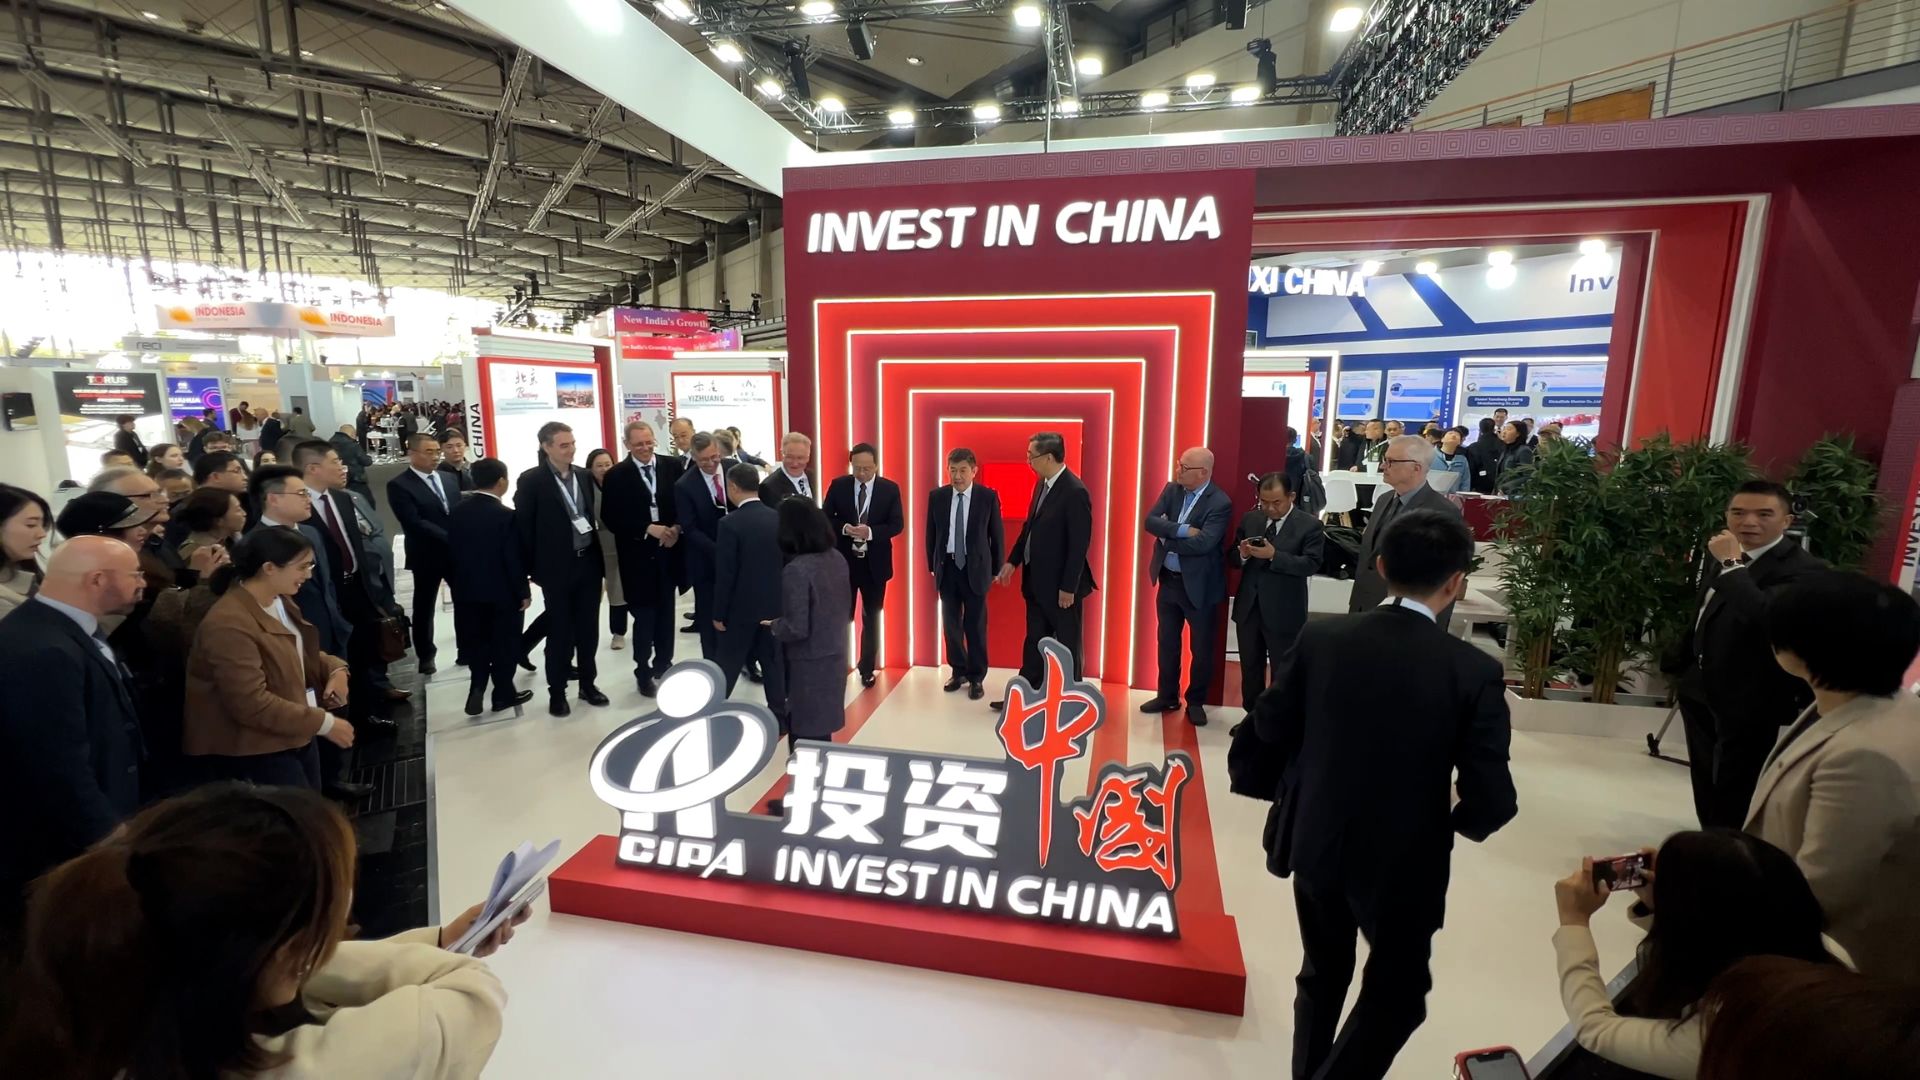 Dignitaries at the Invest in China stand at Hannover Messe. /CGTN/Medienwerk